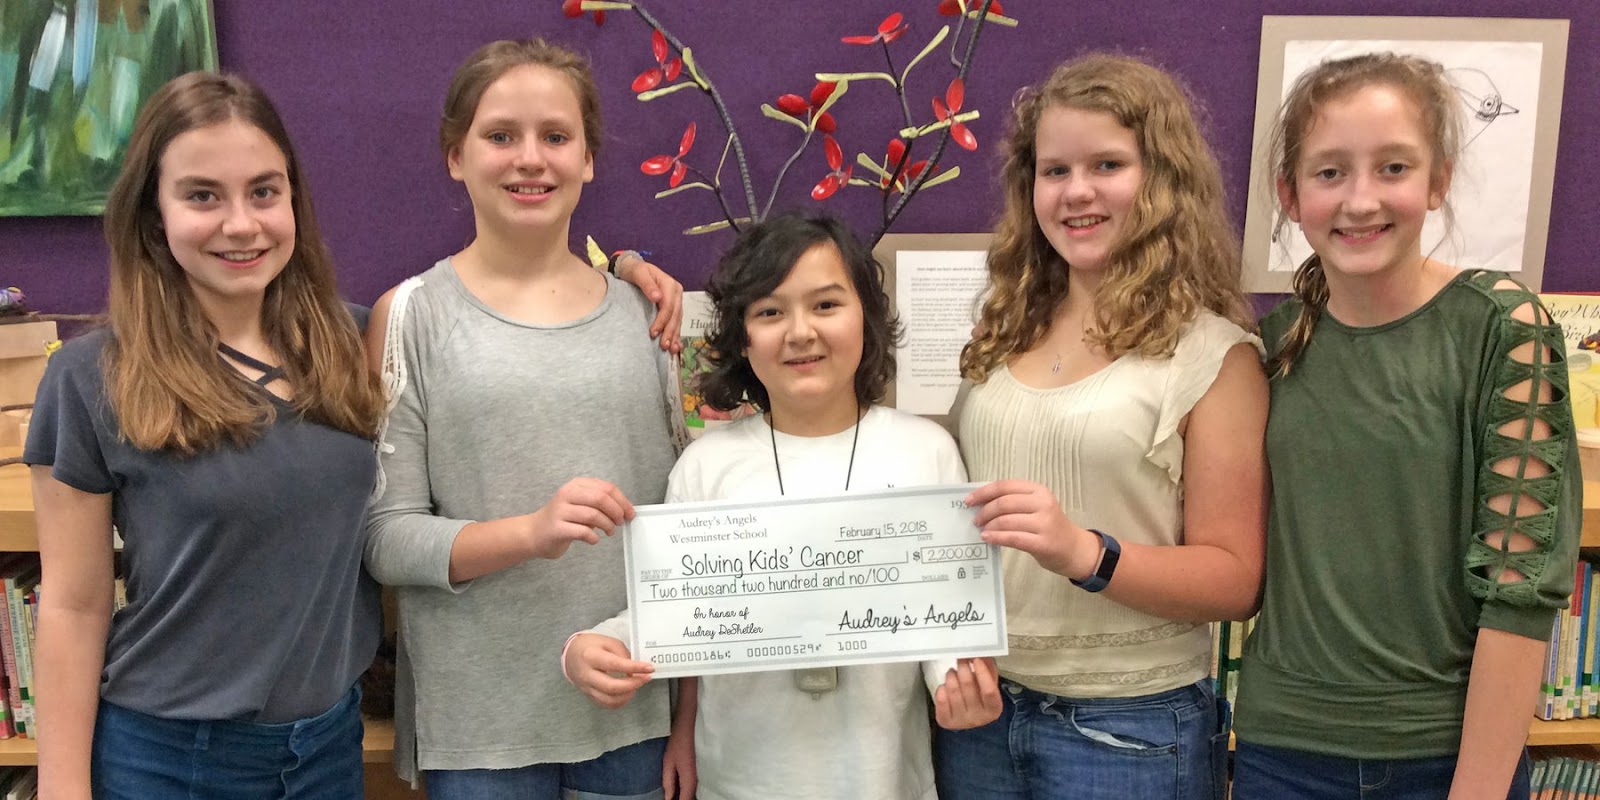 Photo: Audrey with her friends holding a check made out to Solving Kids Cancer signed by their childhood cancer fundraiser, Audrey's Angels.